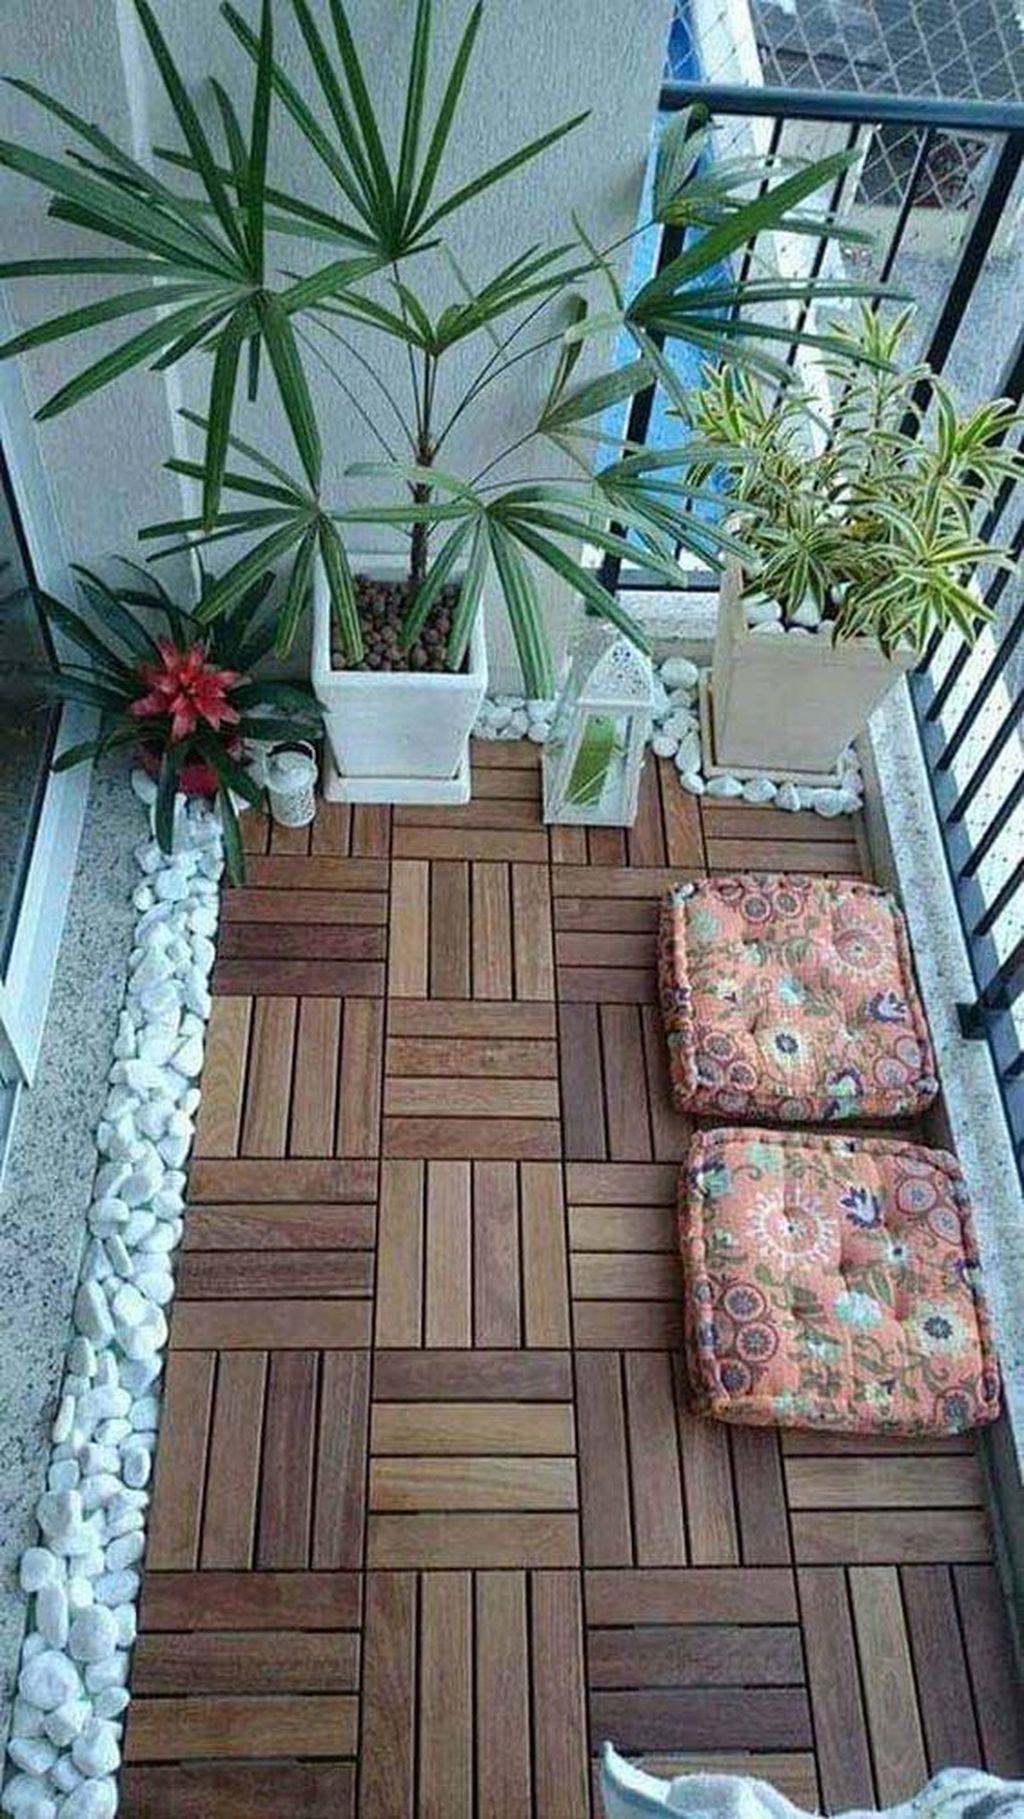 55 Inspiring Wooden Floor Design Ideas On Balcony For Your Apartment